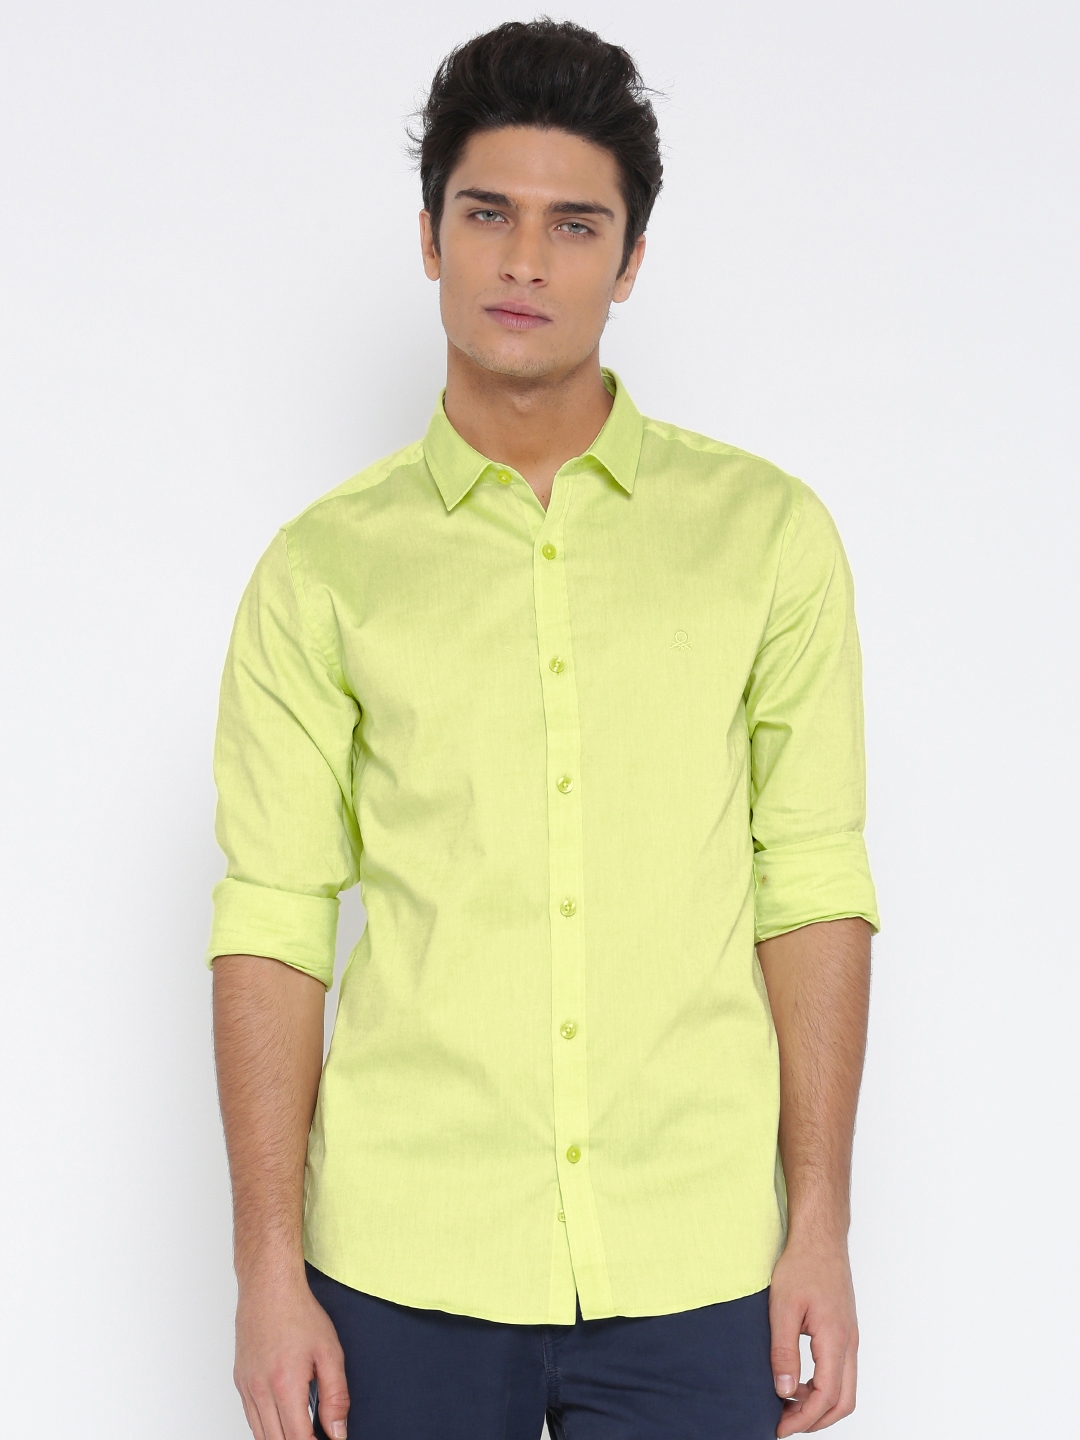 What Color Goes With Lime Green Shirt - zdny3lman